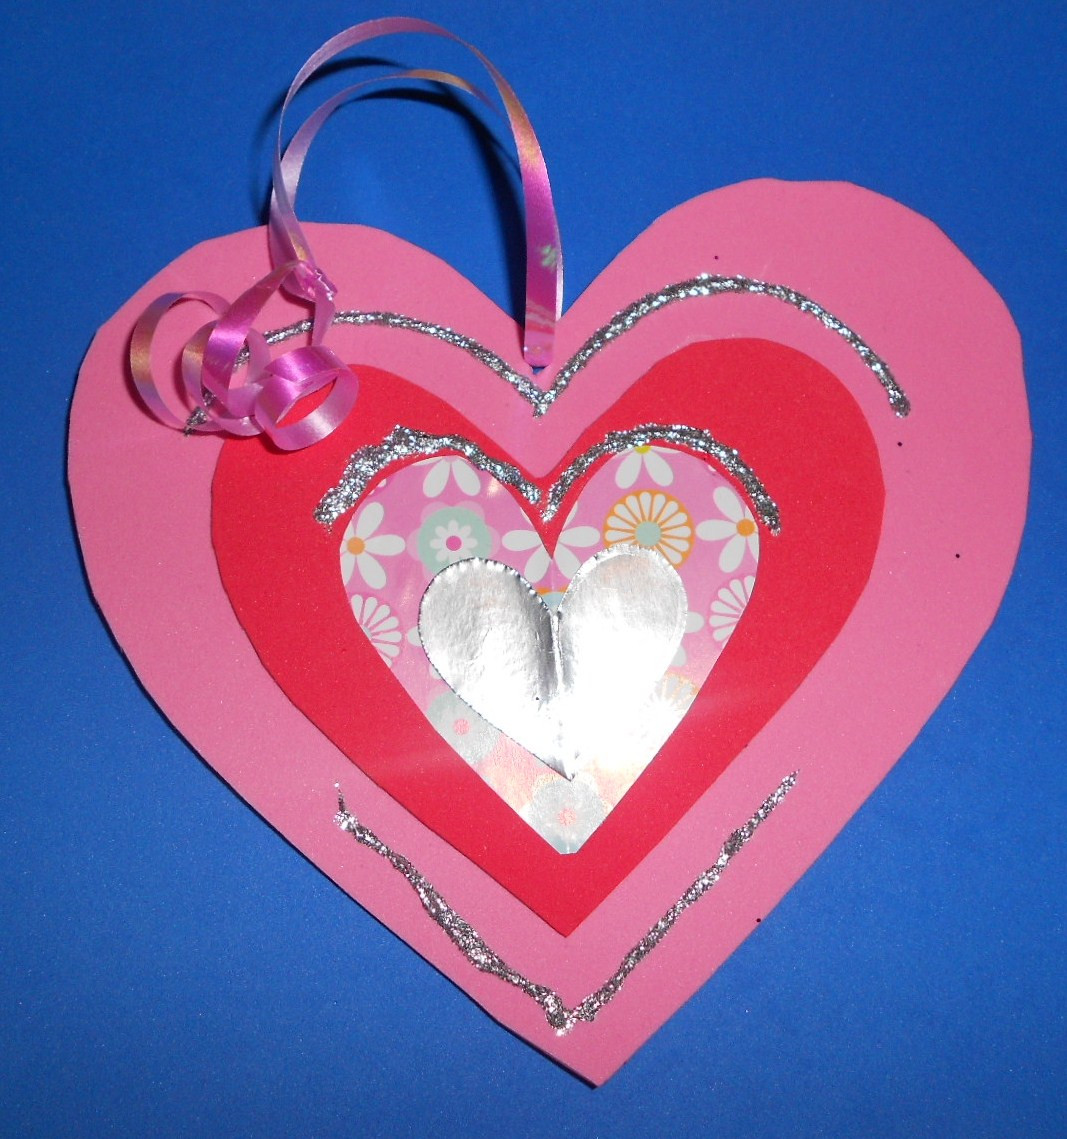 Arts N Crafts For Toddlers
 James&May Arts and Crafts Blog Love Heart Crafts for Children